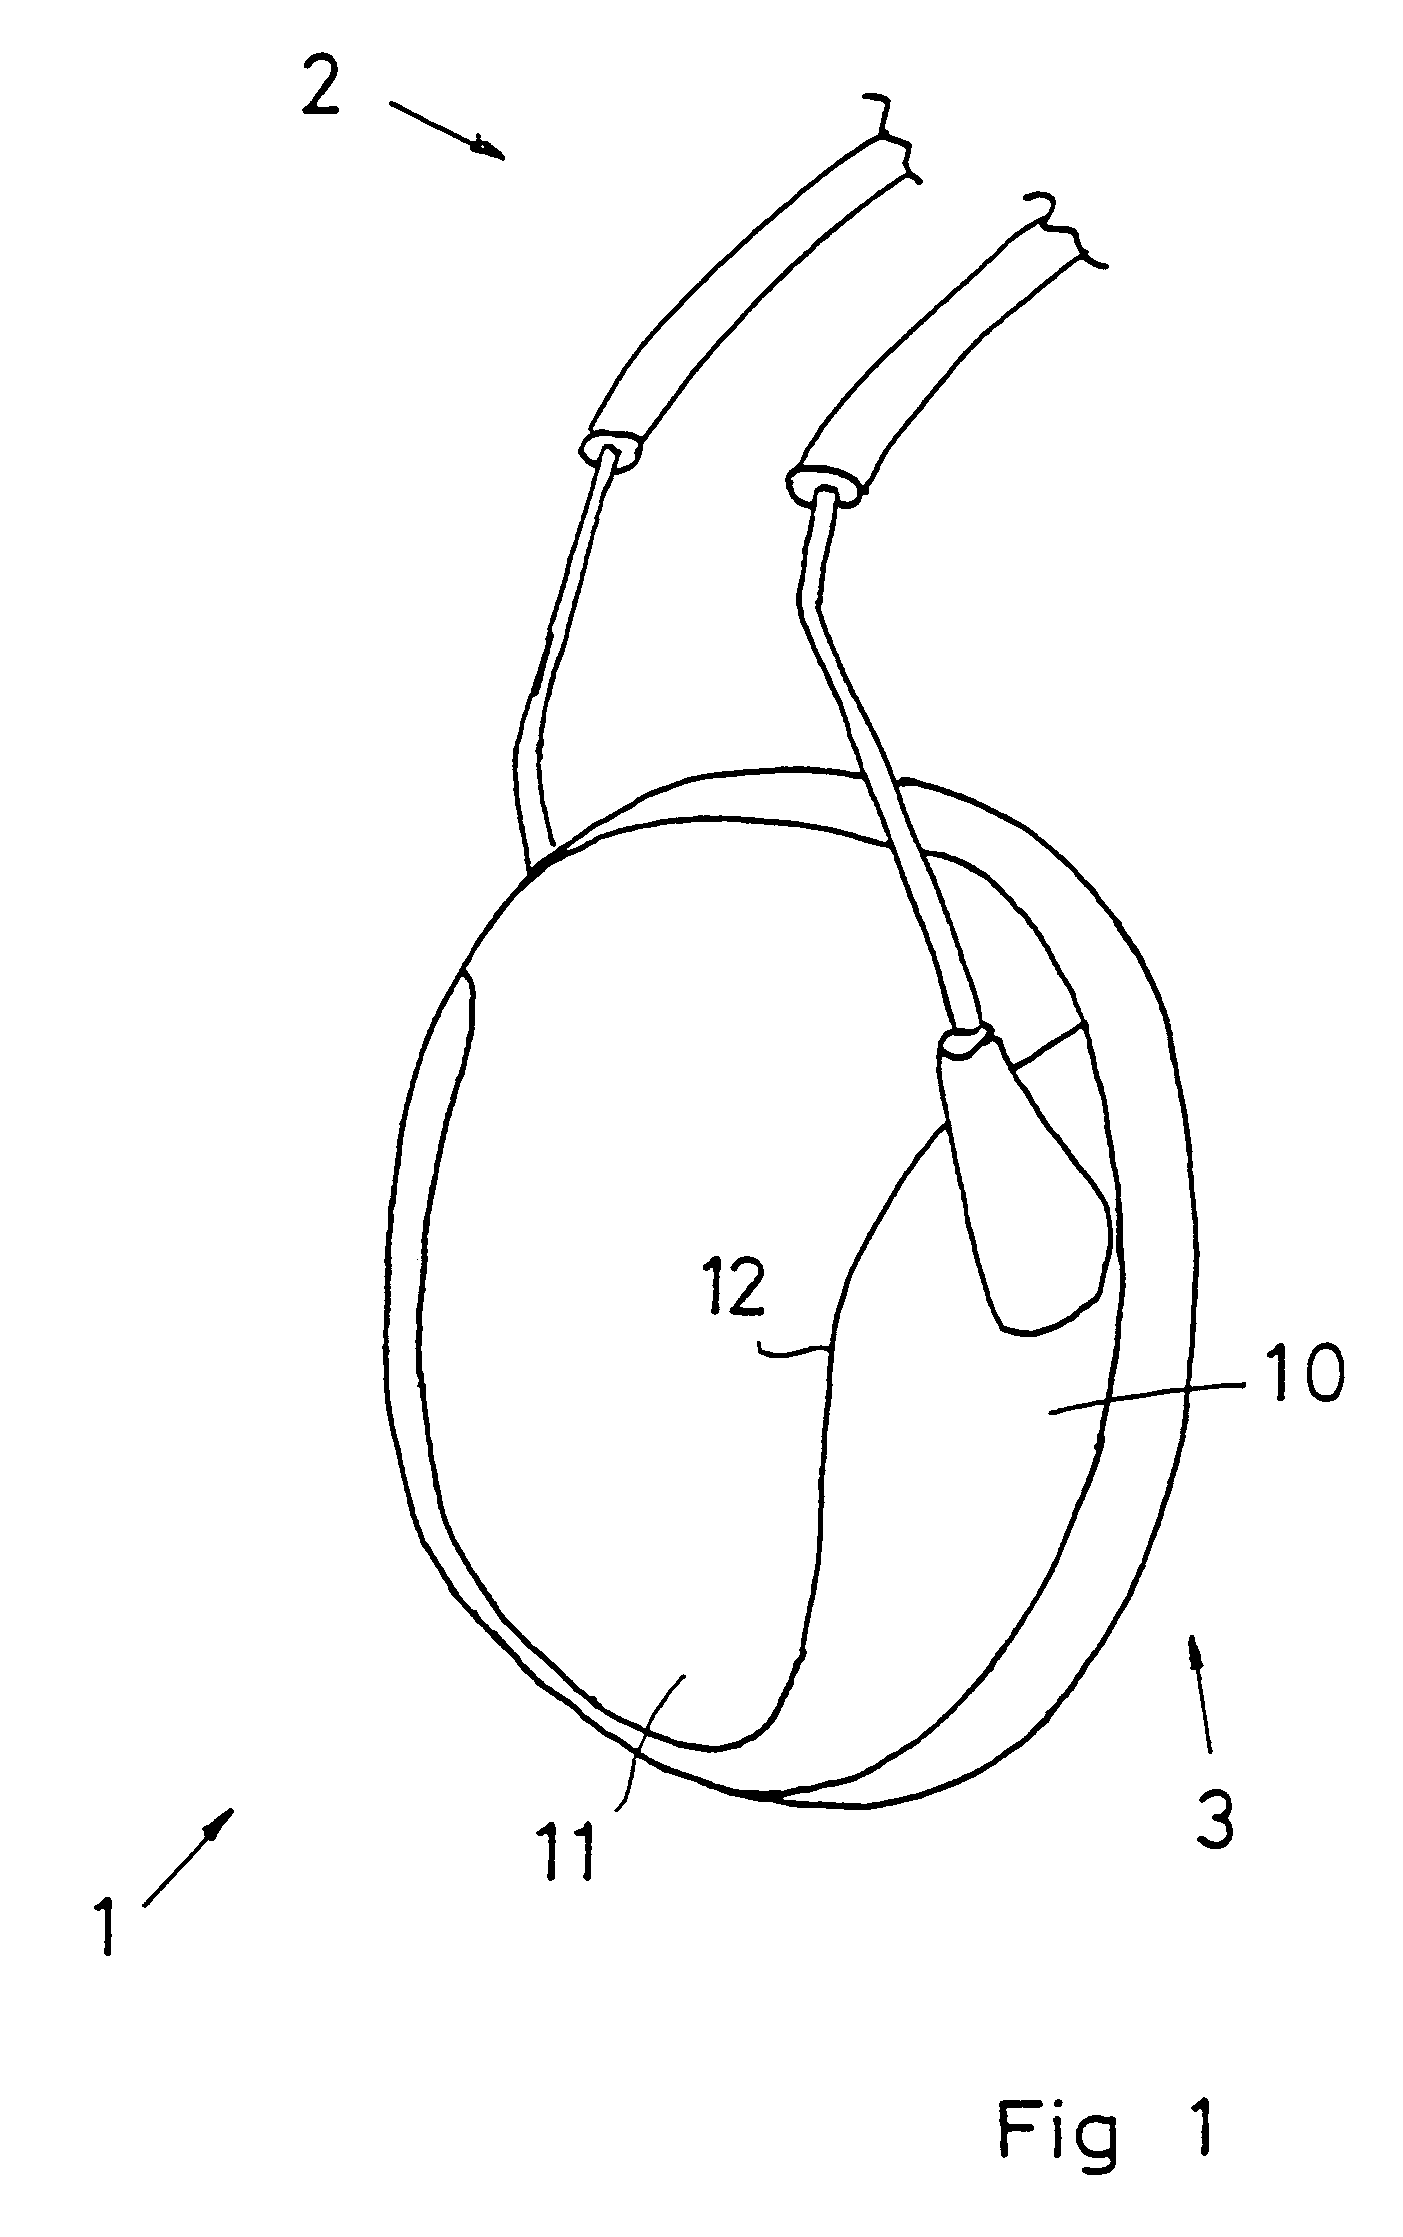 Method of producing a hood, and a hood produced according to the method